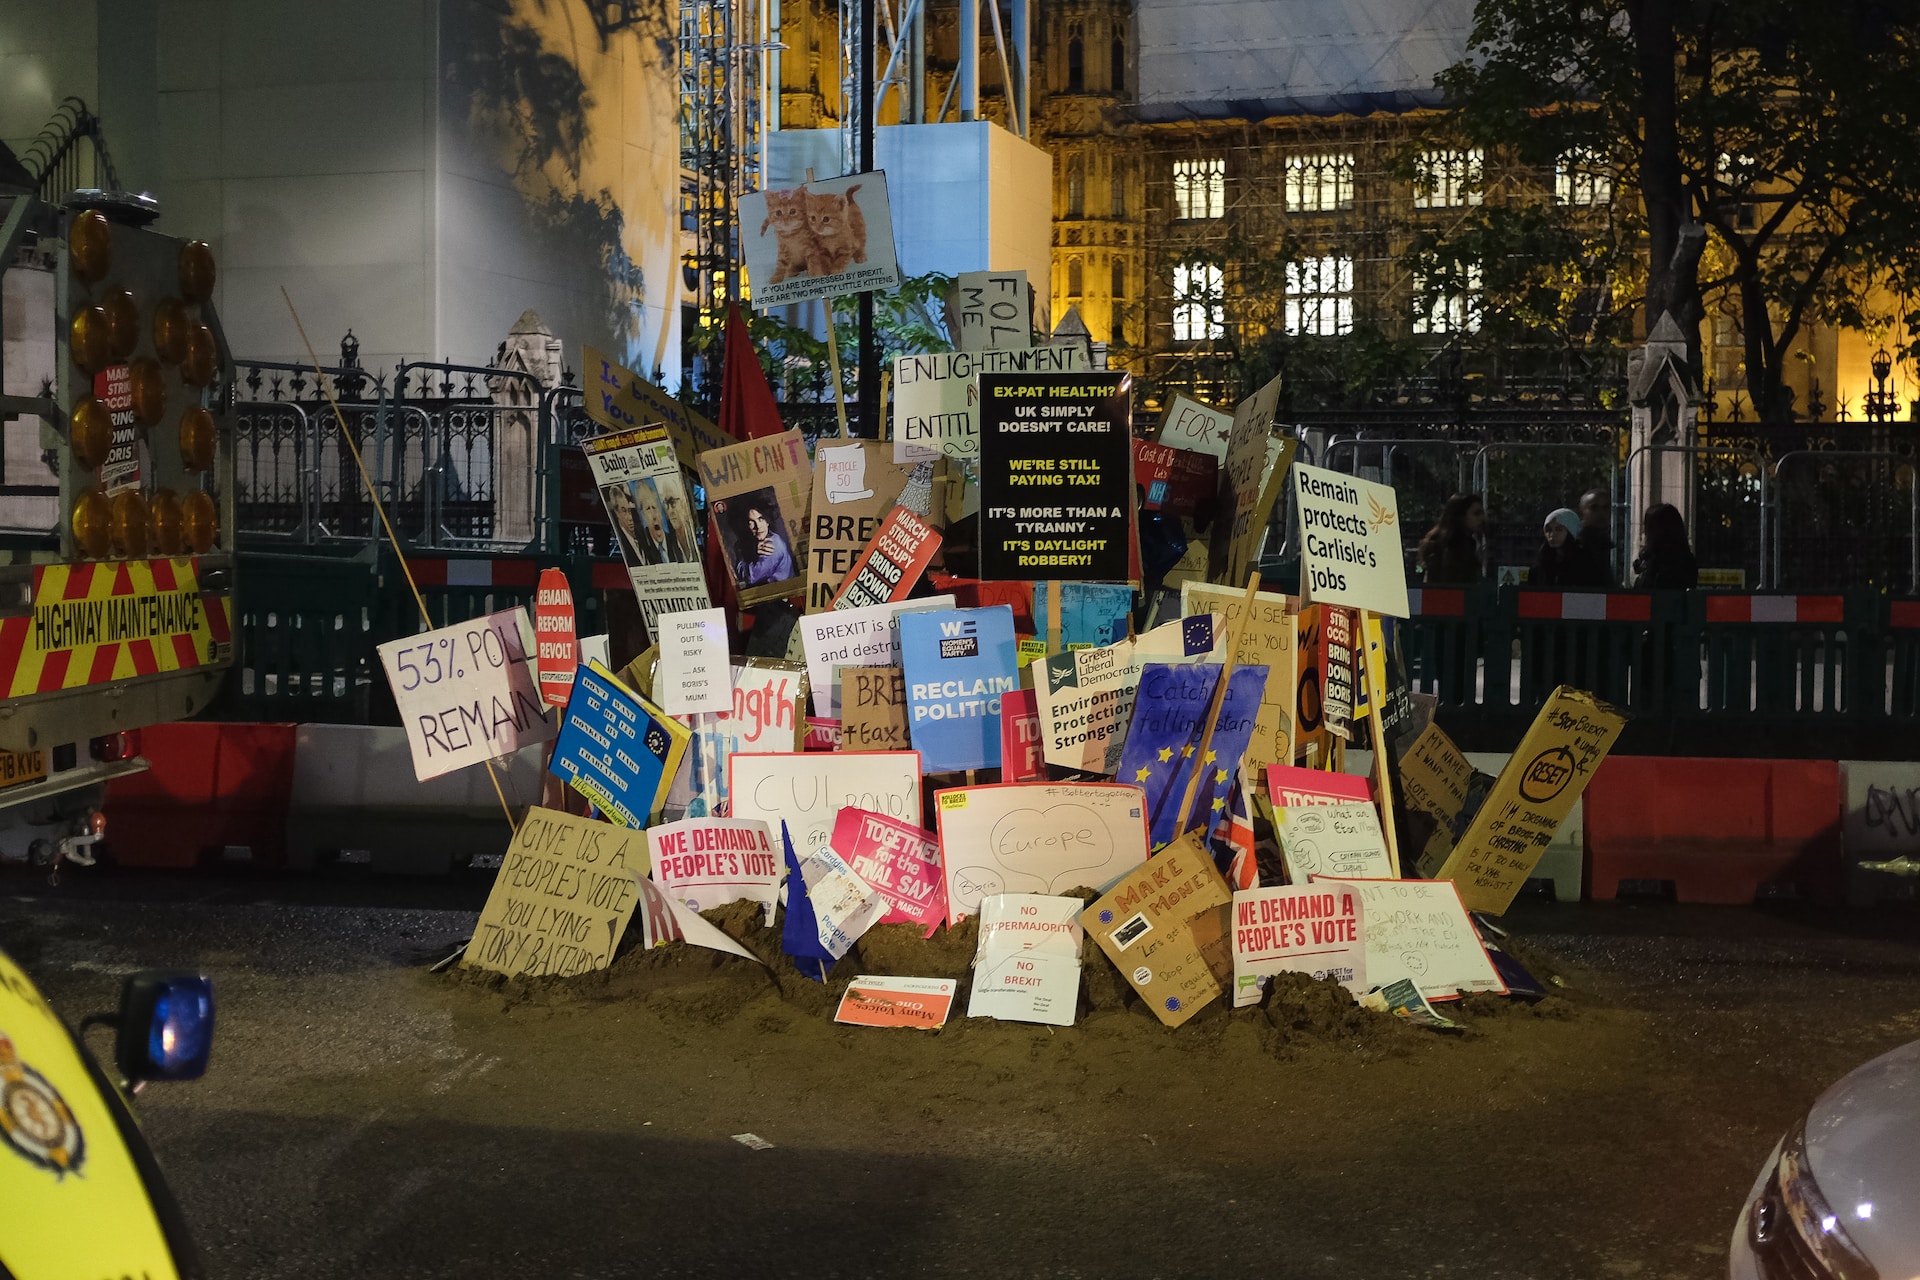 A large pile of protest signs related to Brexit scattered in front of a building.